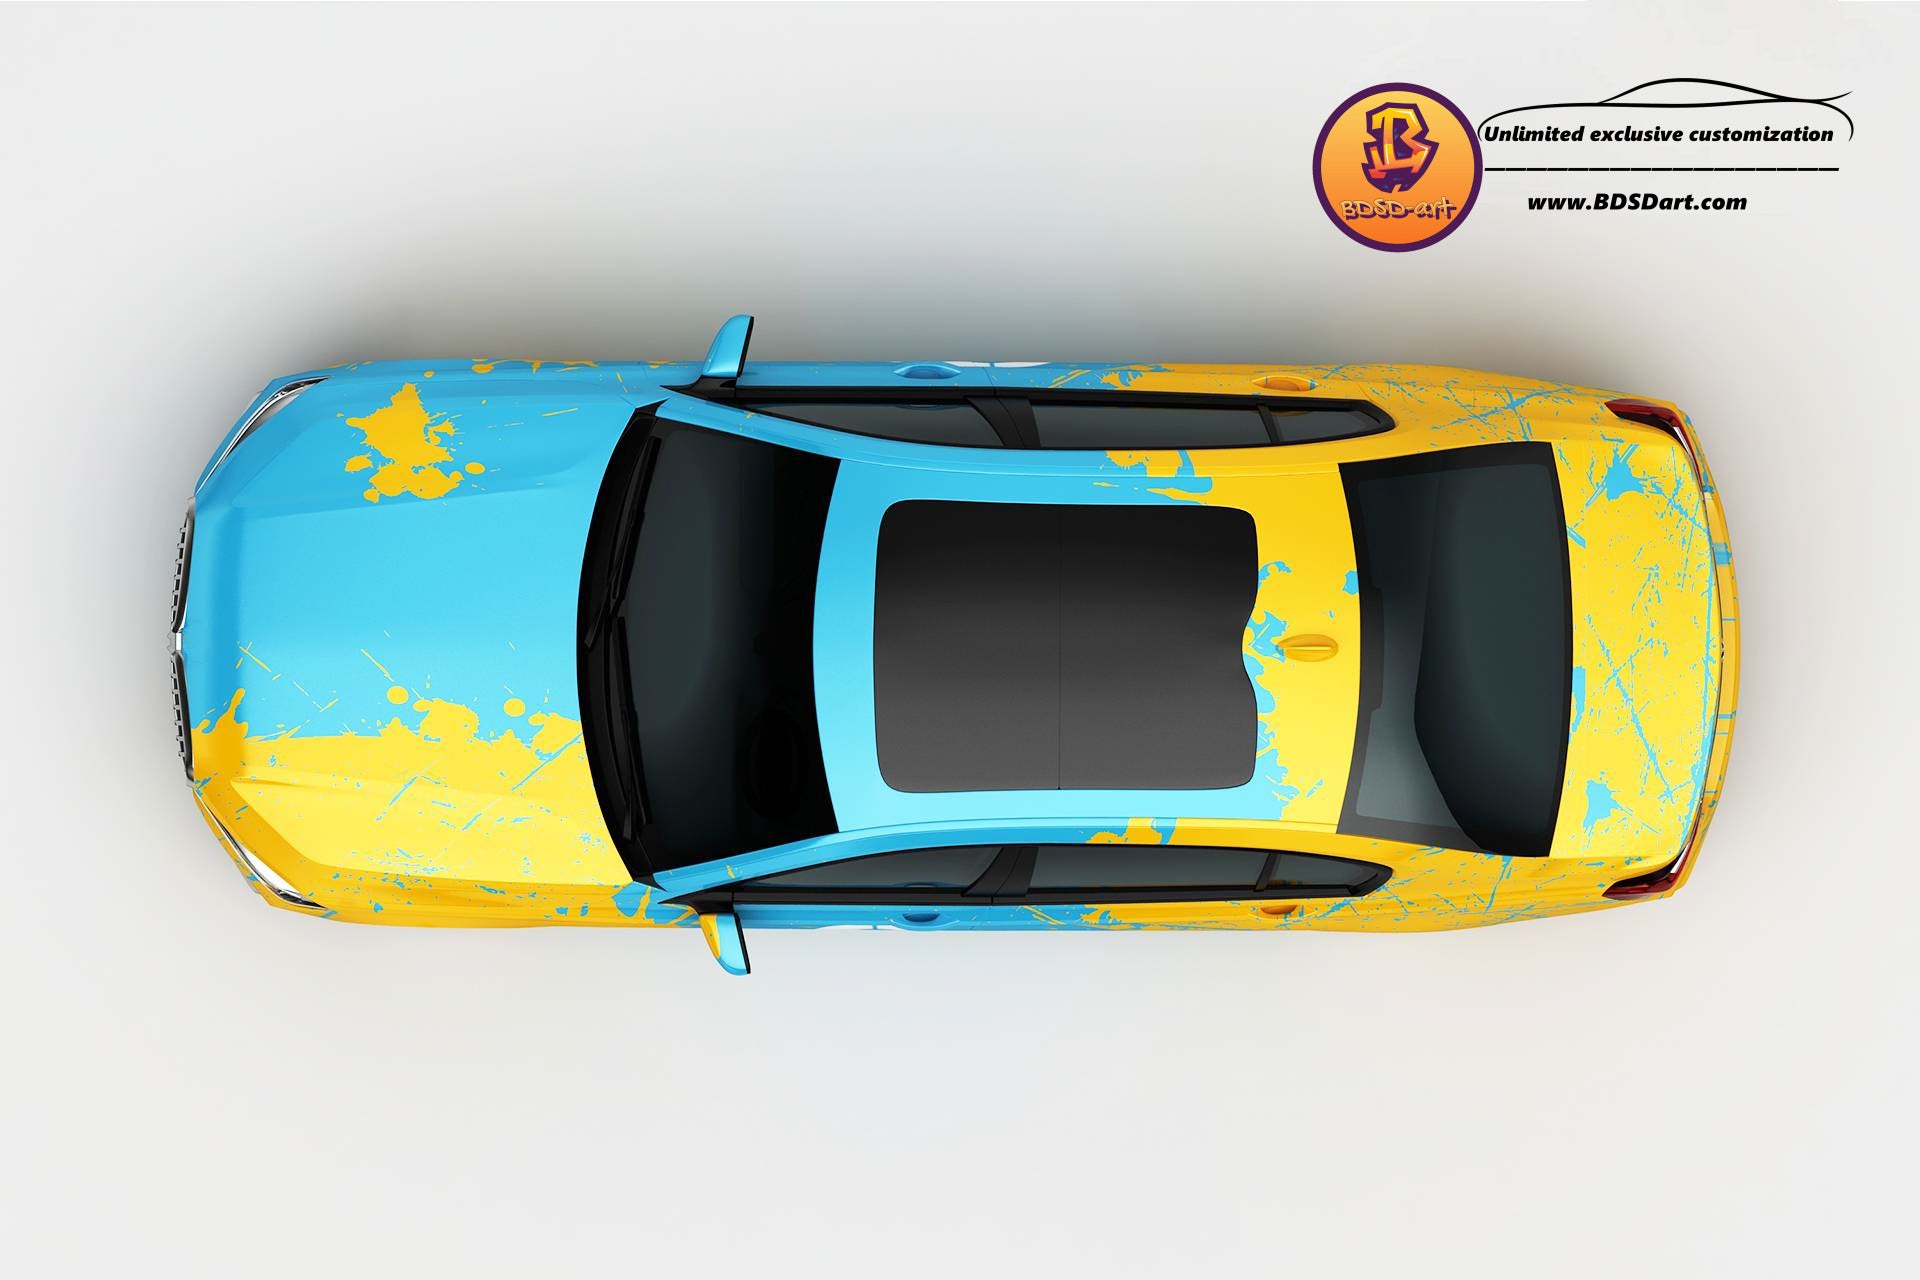 Full Car Wrap Classic-Yellow blue Fit With Any Cars Vinyl graphics car –  BDSDart